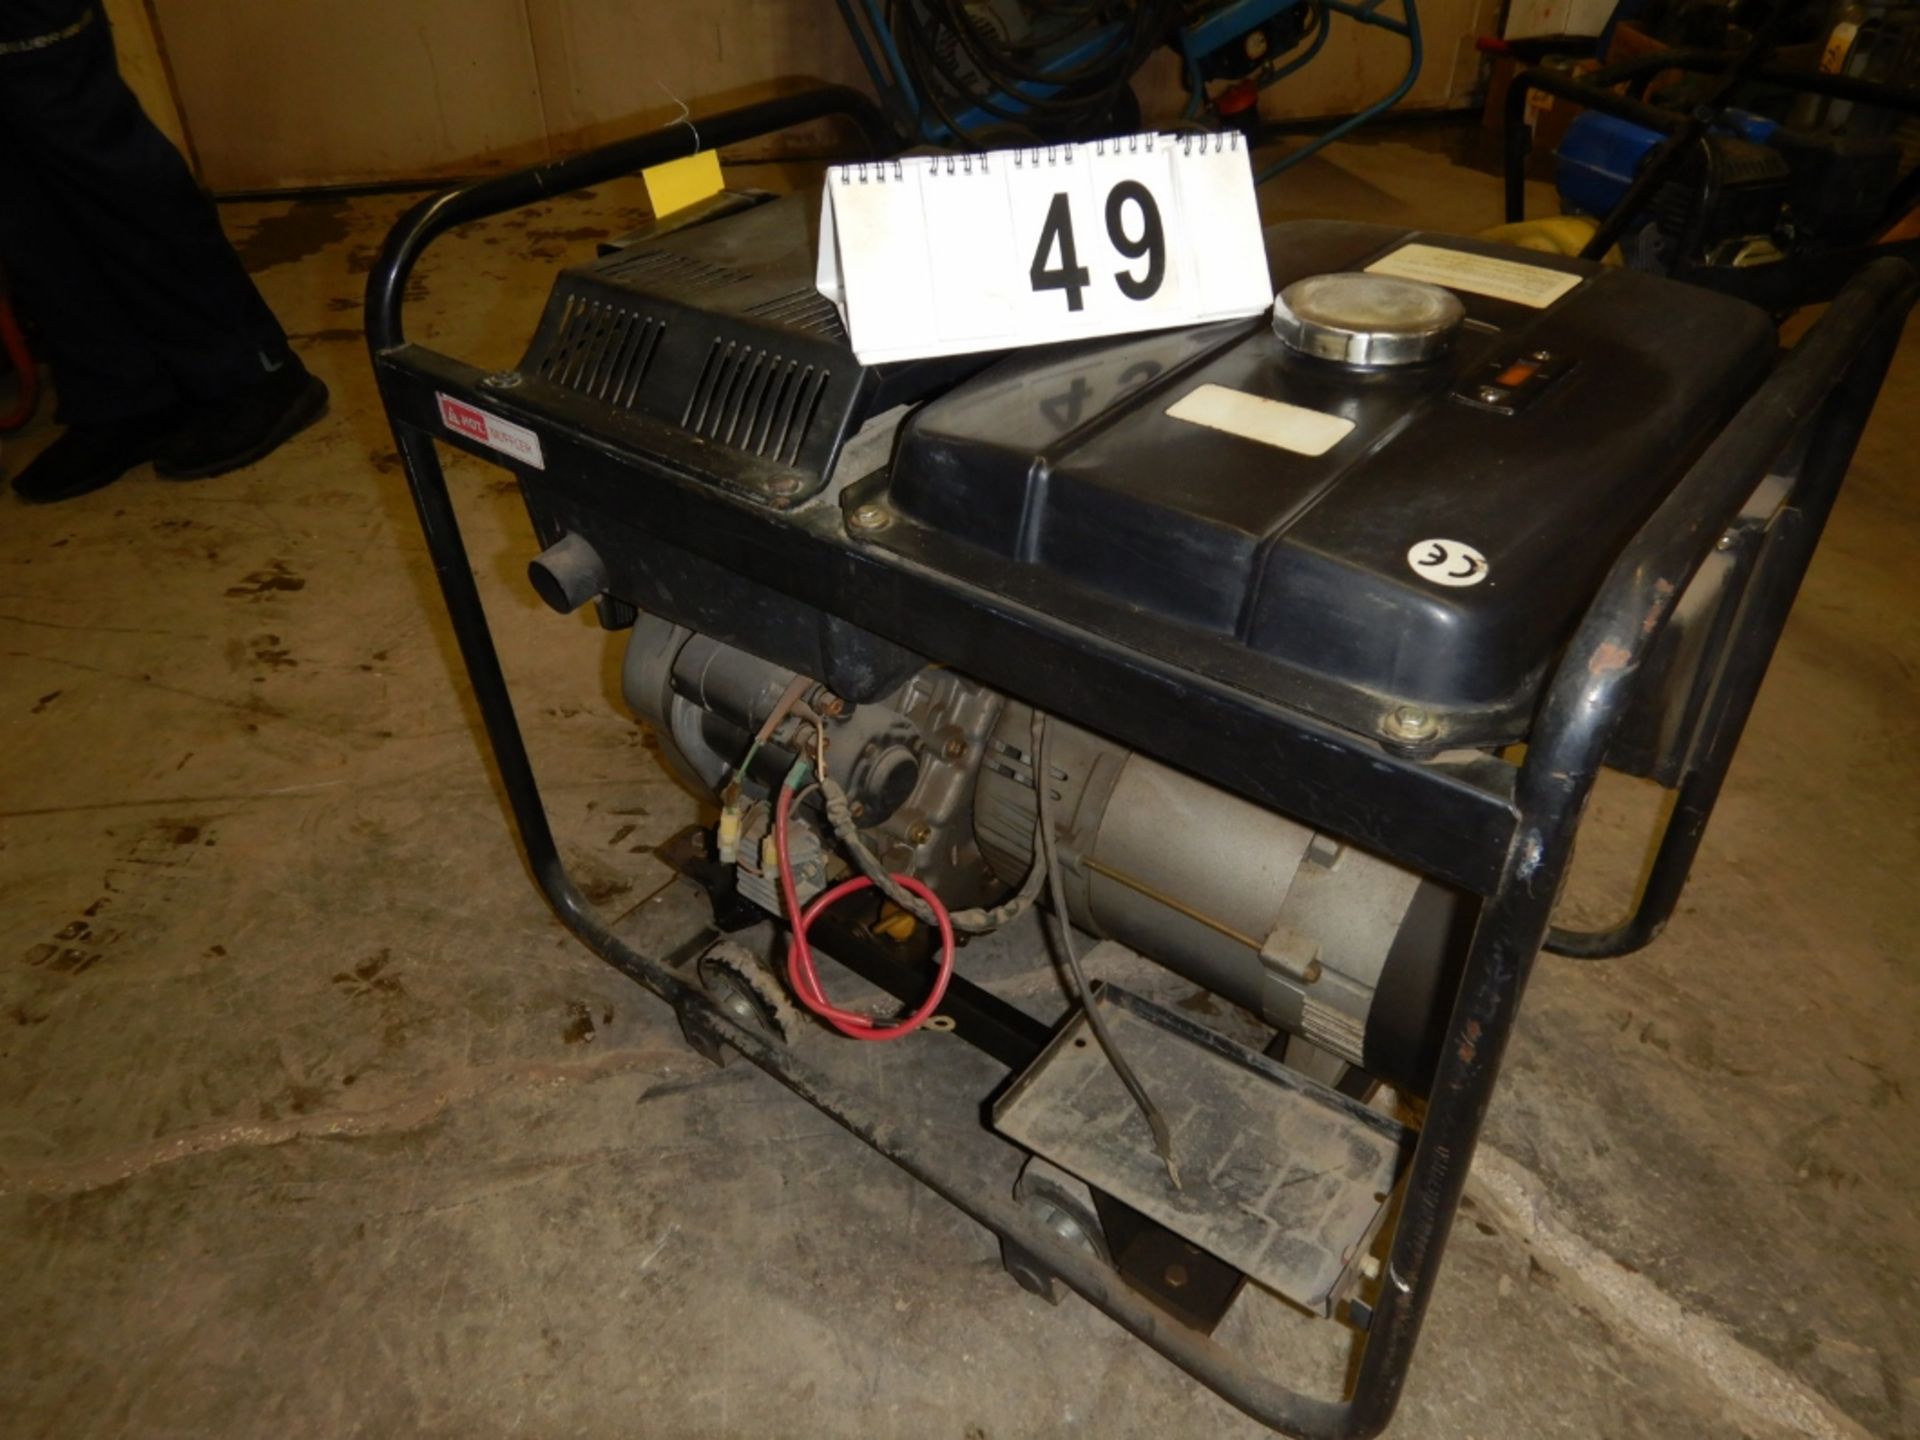 EAGLE POWER TOOLS E65DRE AIR COOLED POWER GENERATOR W/DIESEL ENGINE,WHEEL KIT, ELECTRIC START - Image 4 of 5